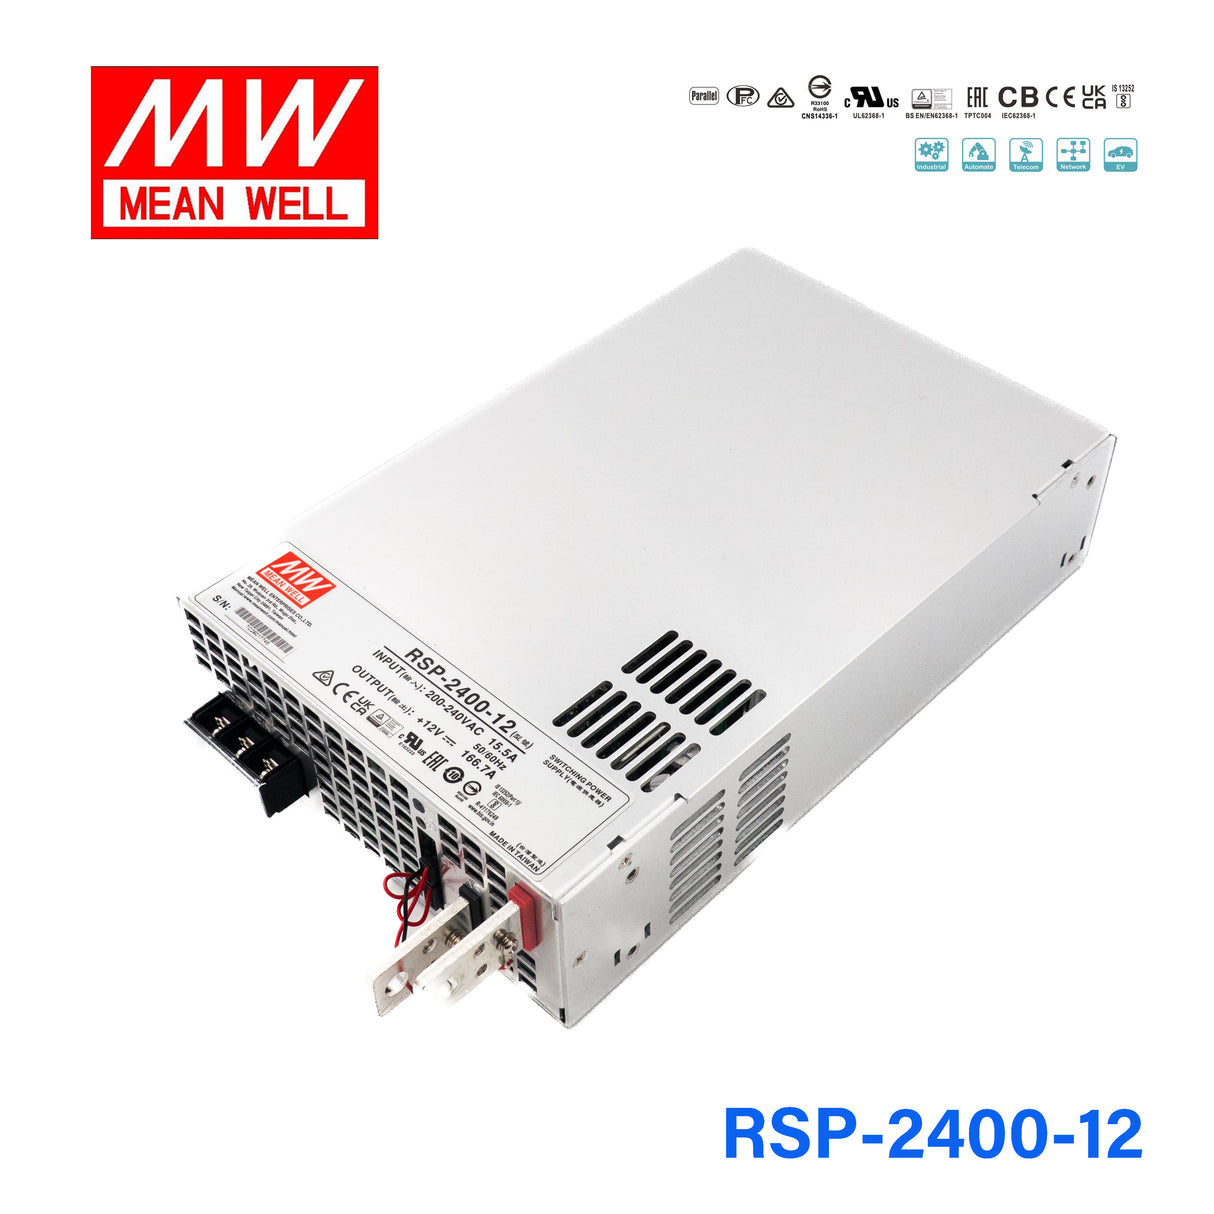 Mean Well RSP-2400-12 Power Supply 2000W 12V